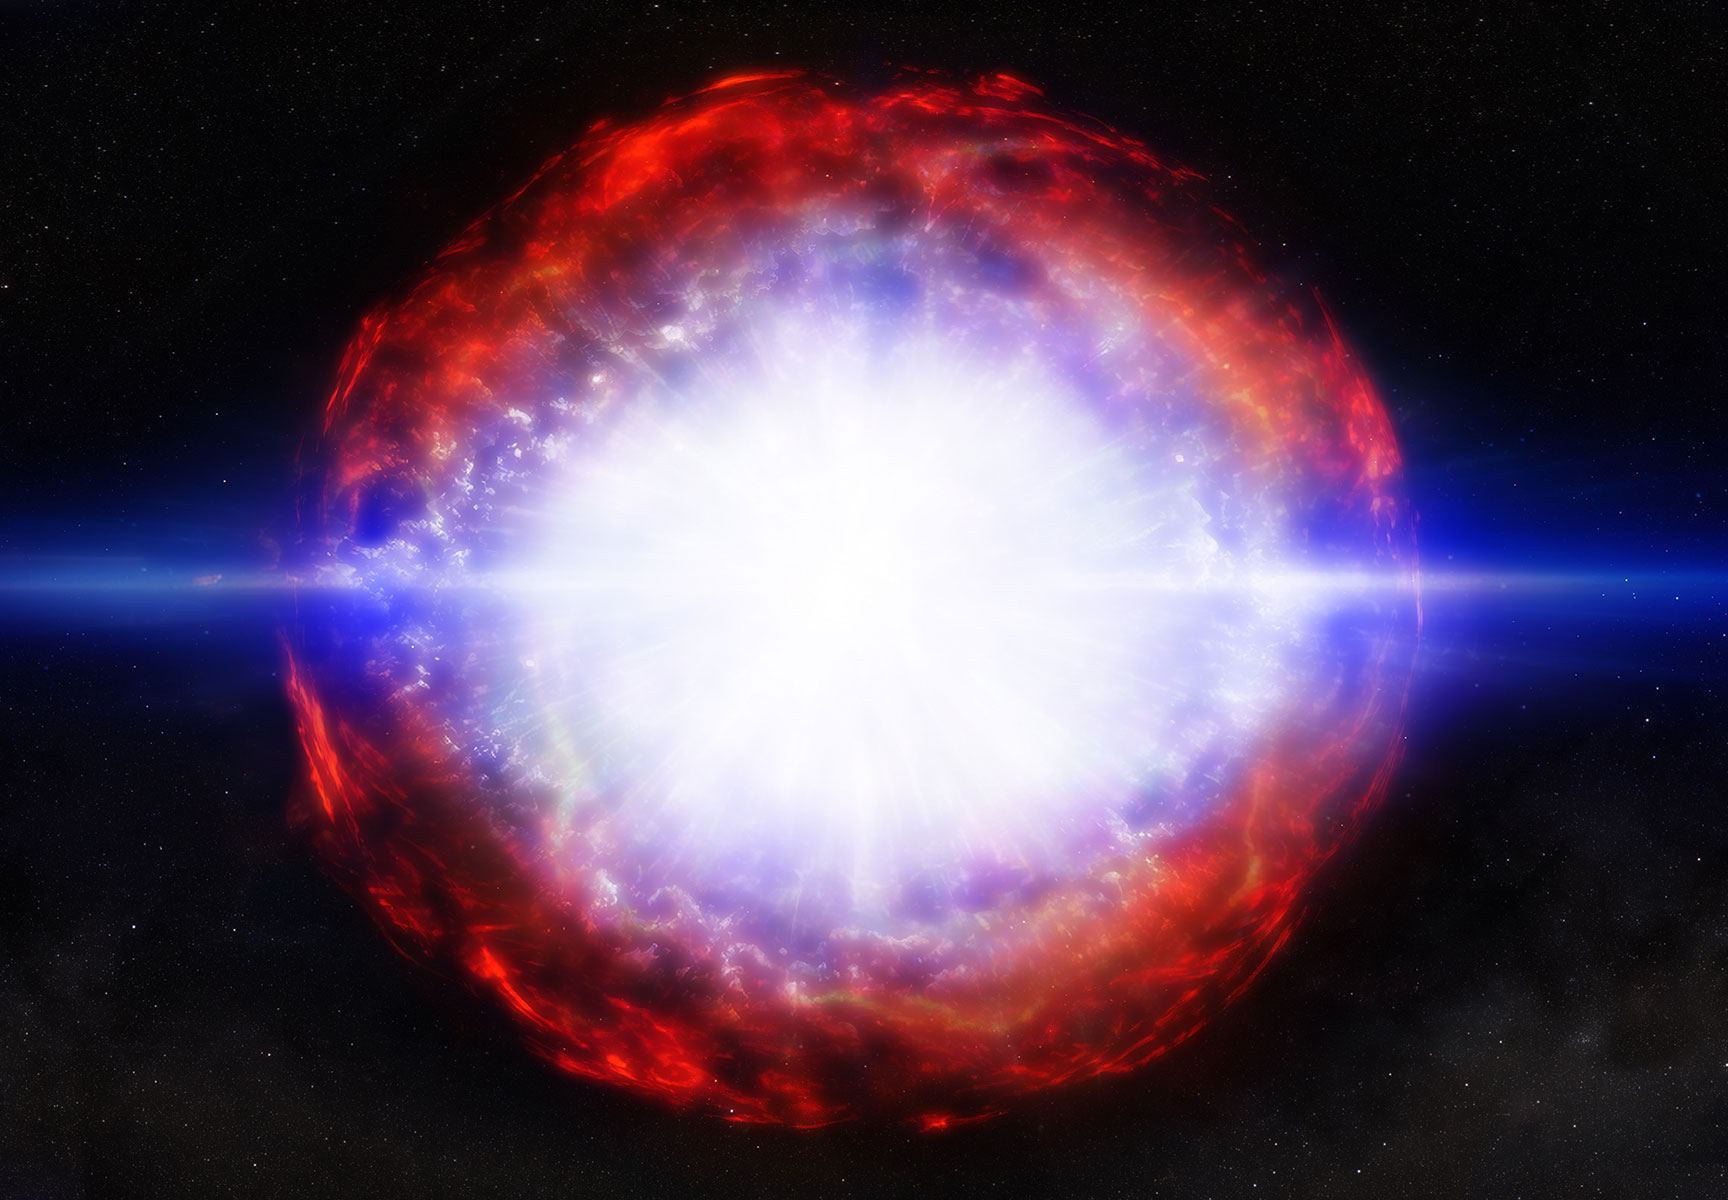 We have spotted a new kind of supernova triggered by cosmic collisions